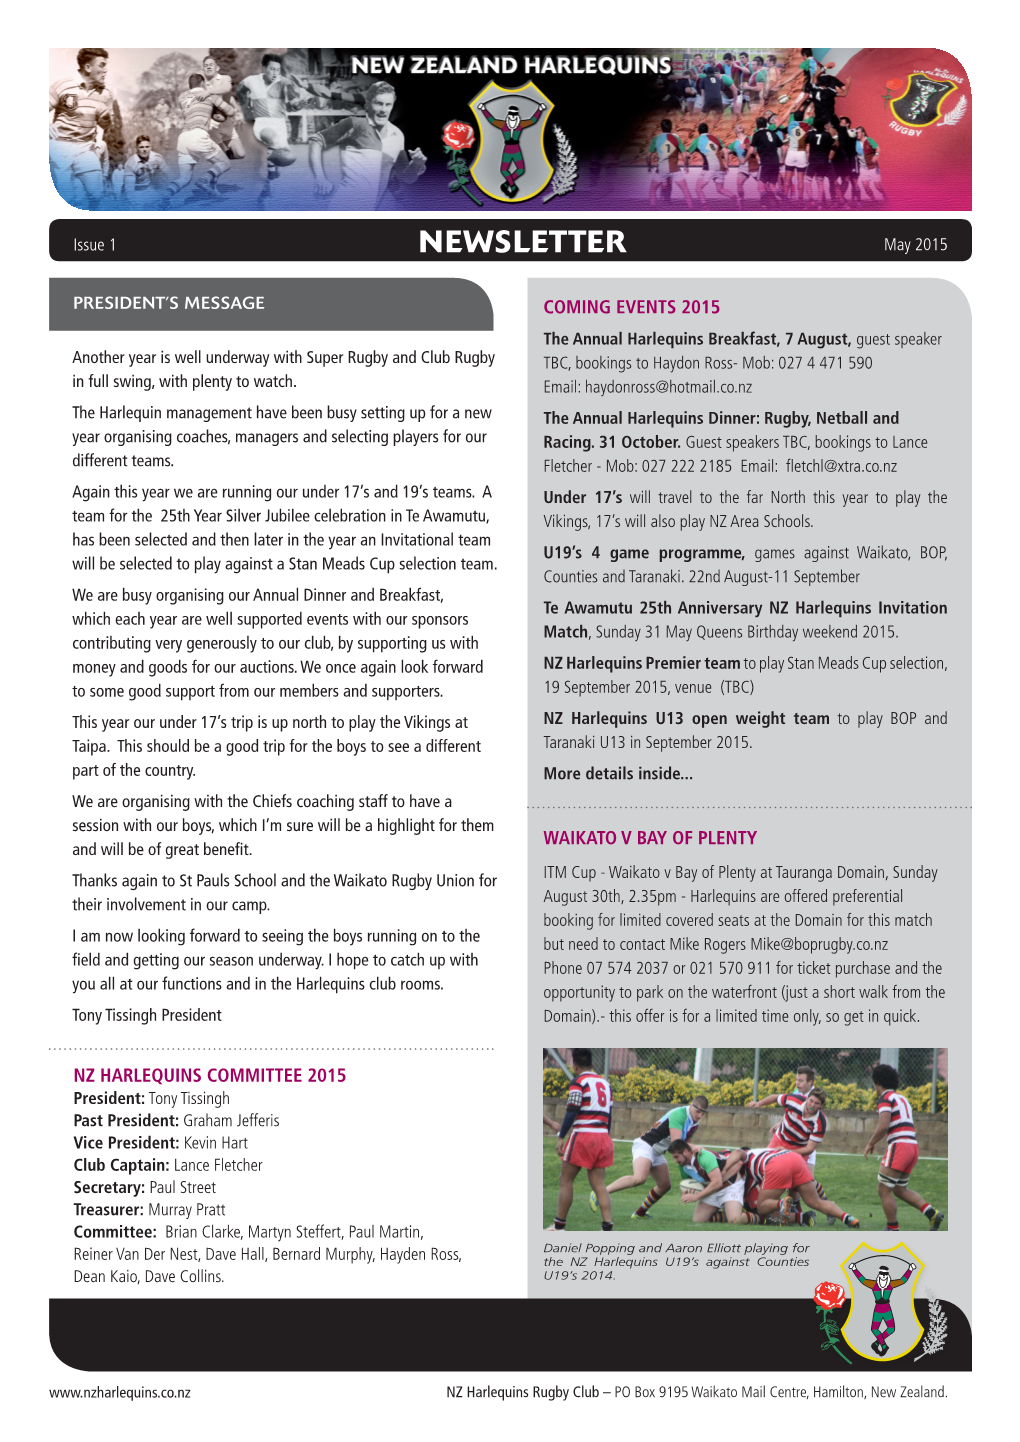 NEWSLETTER May 2015